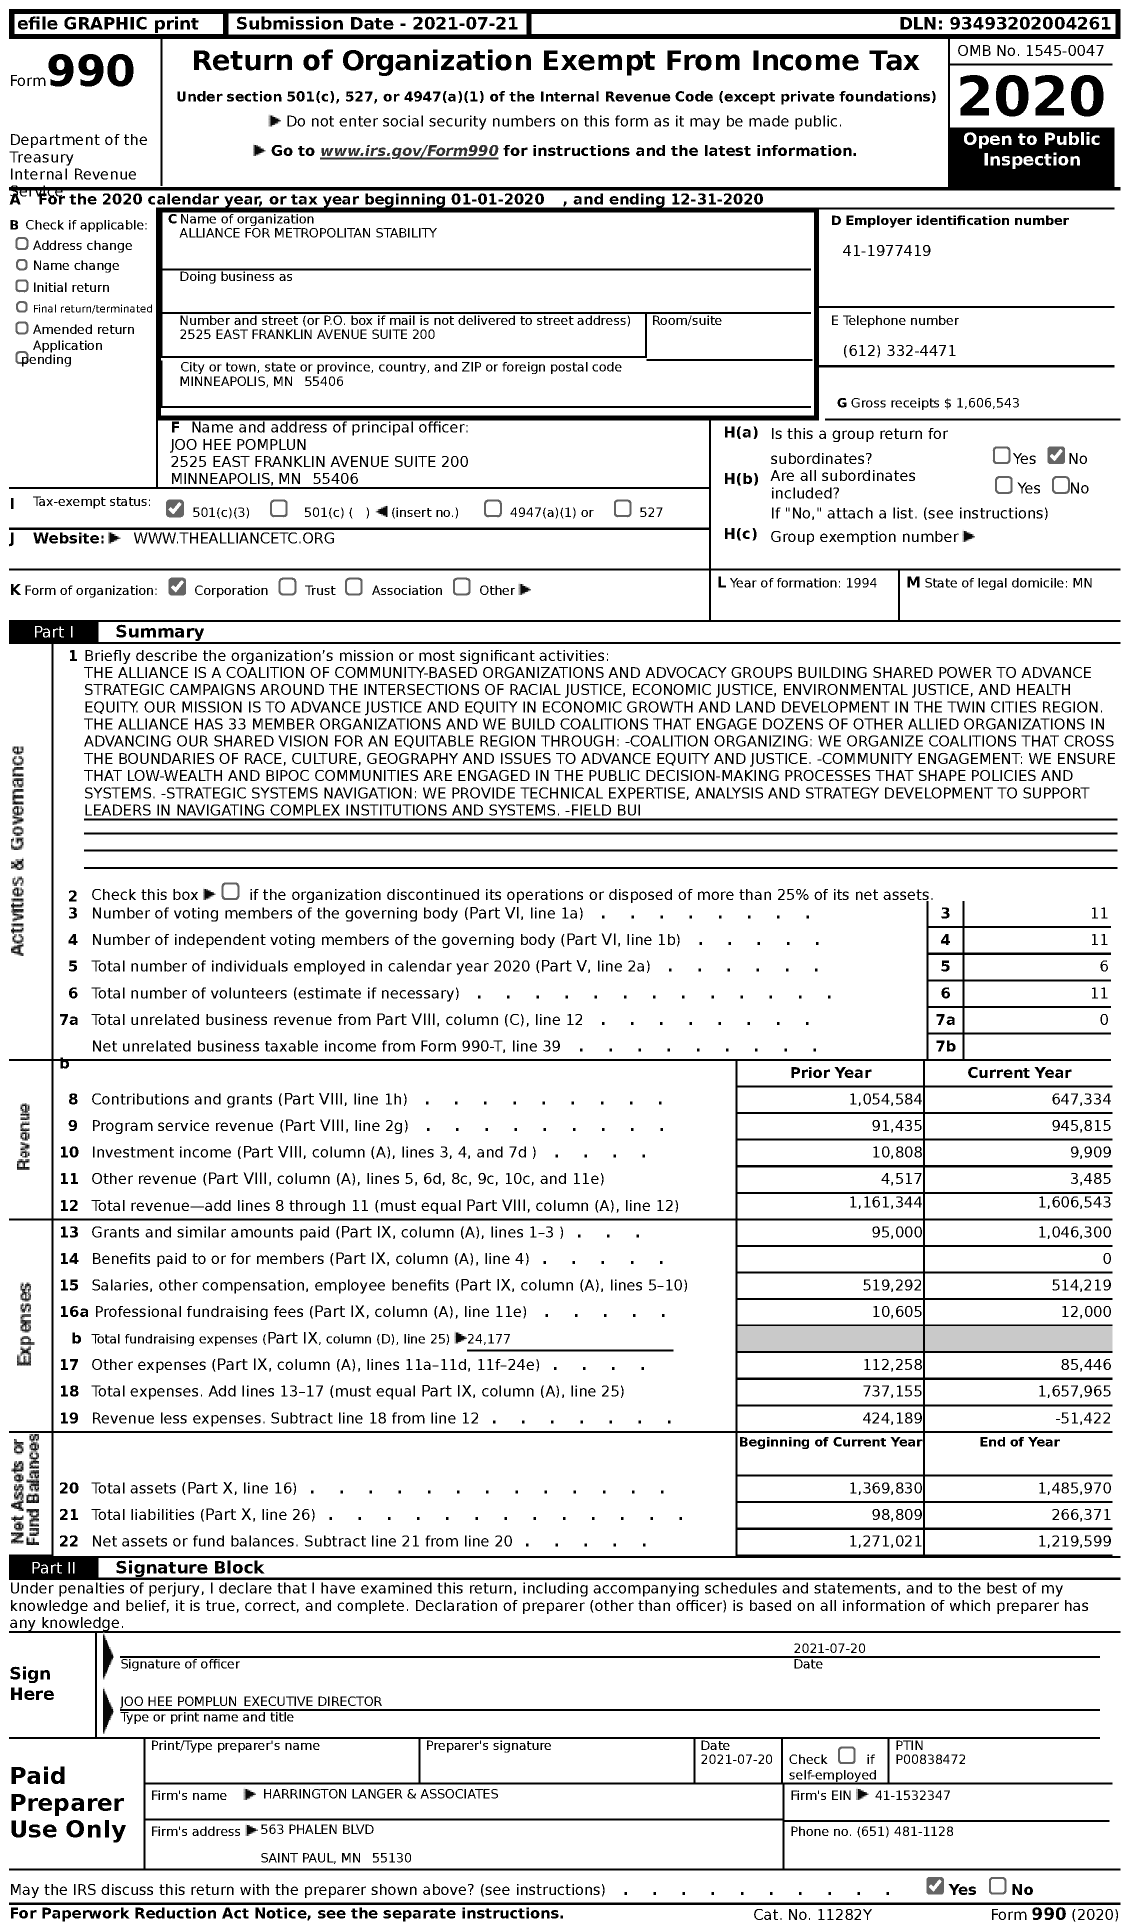 Image of first page of 2020 Form 990 for Alliance for Metropolitan Stability